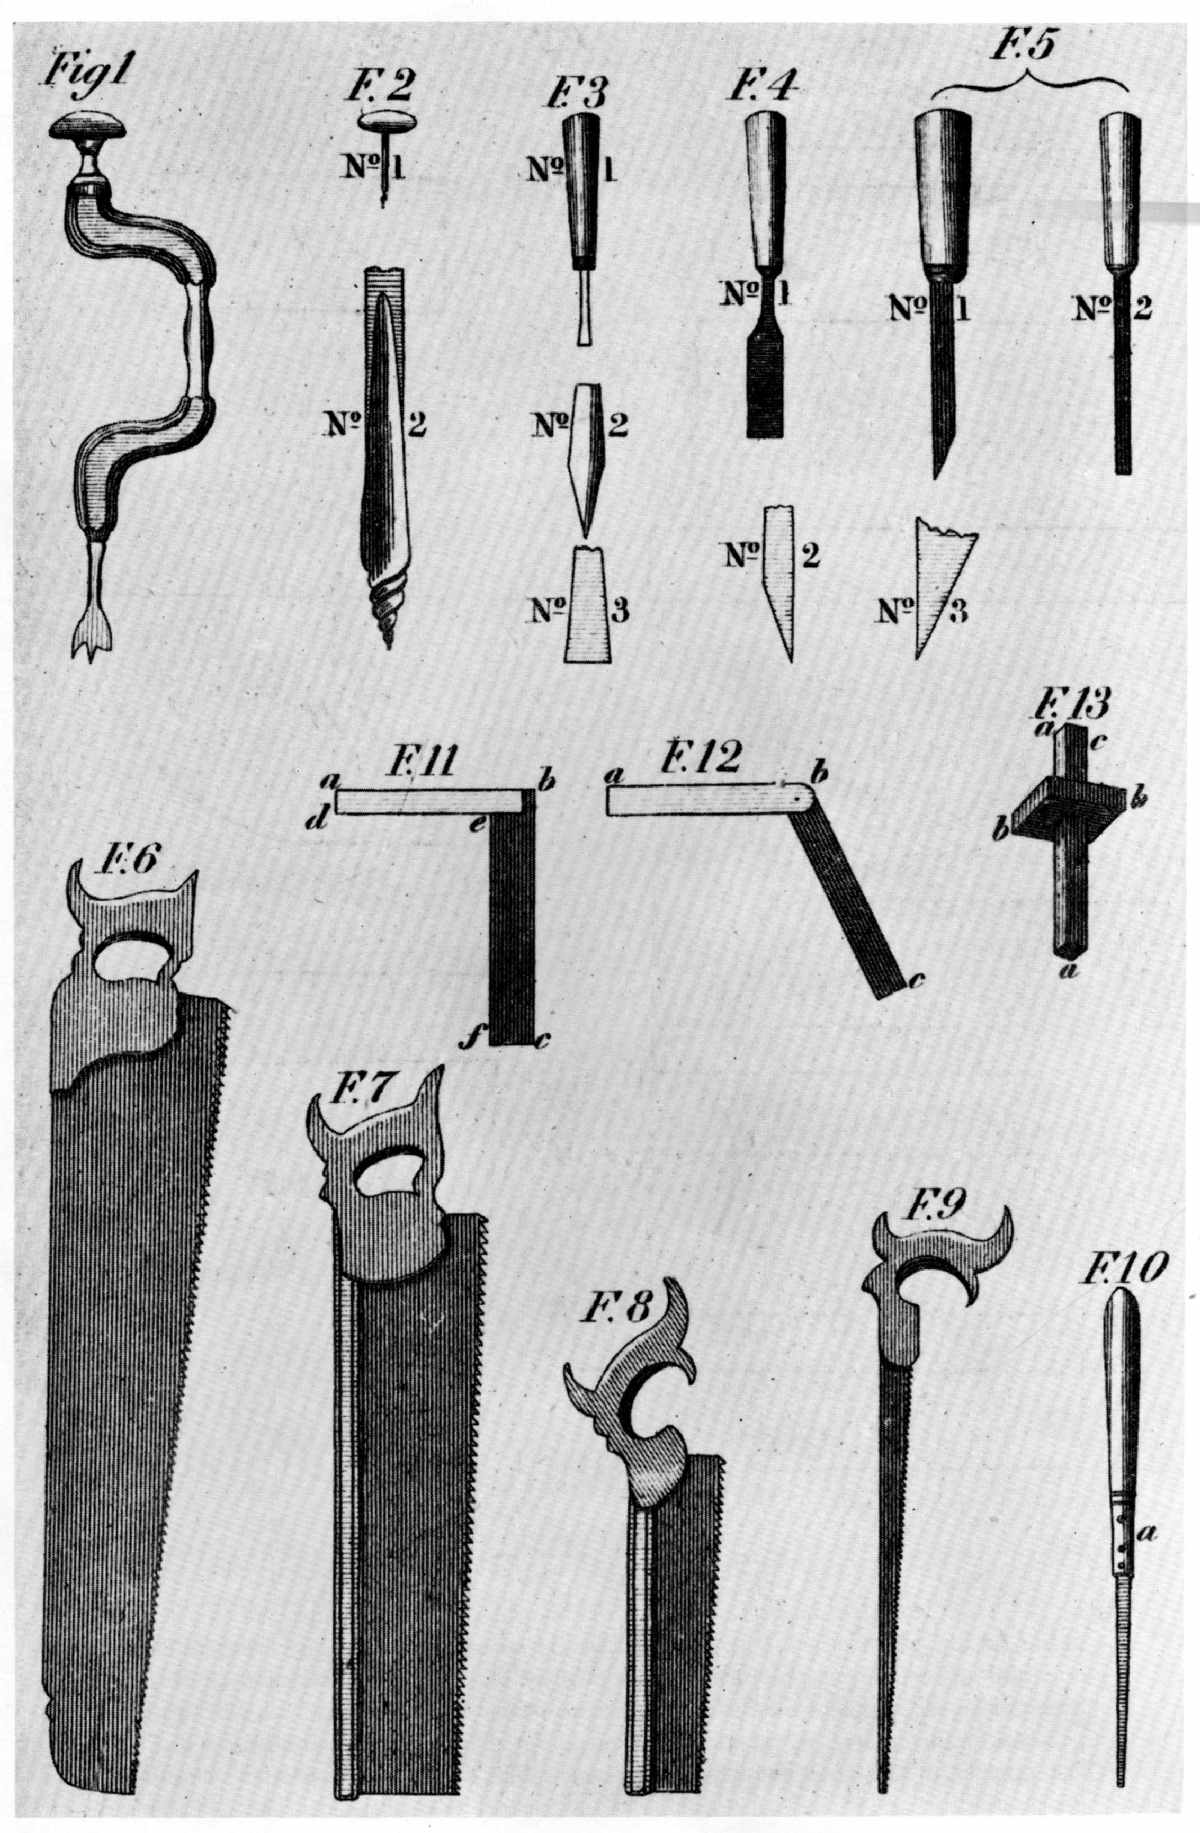 A History of Carpentry Tools